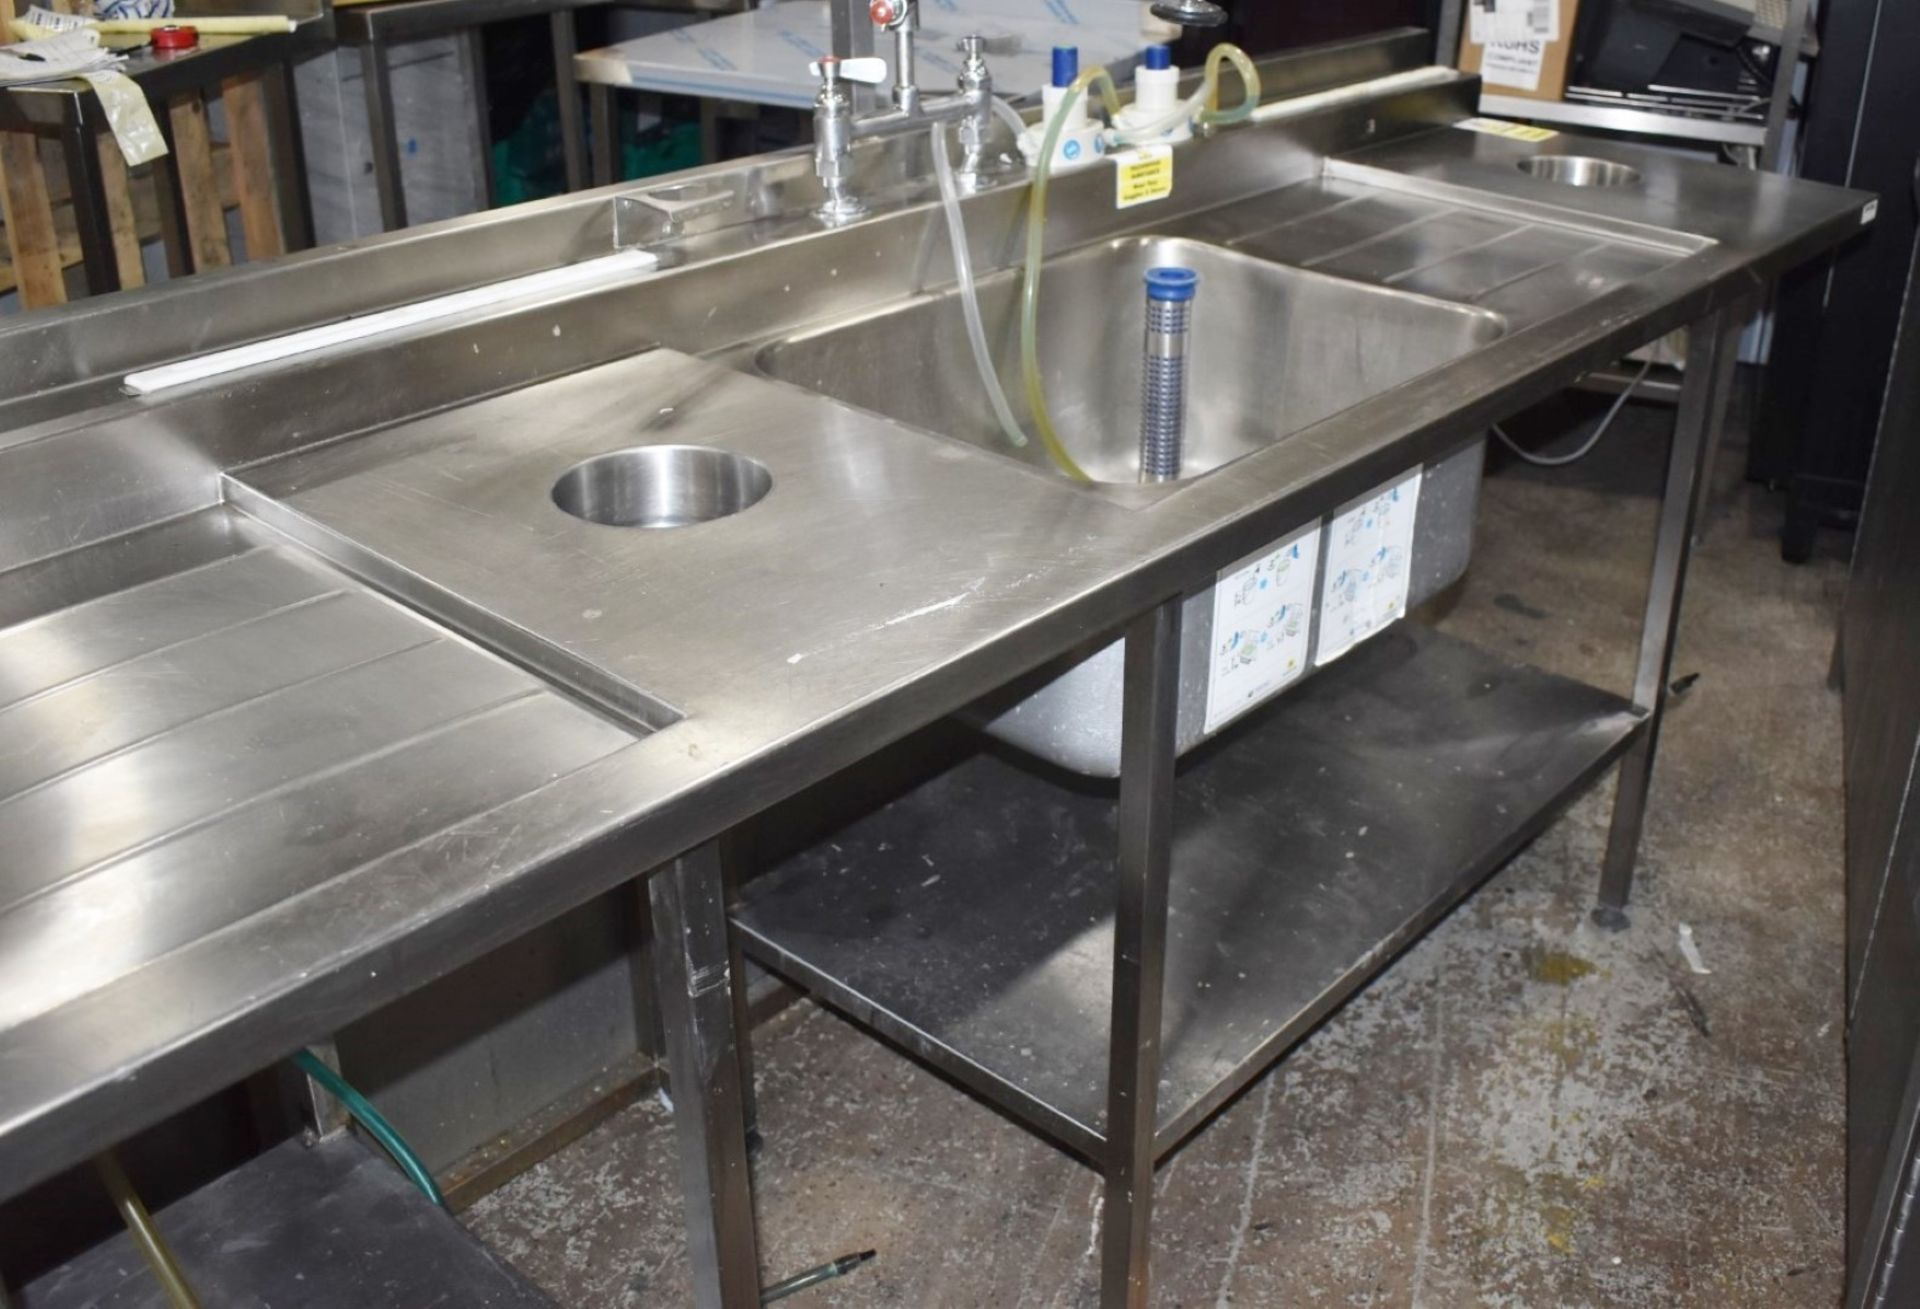 1 x Commercial Kitchen Wash Station With Two Large Sink Bowls, Mixer Taps, Spray Wash Guns, Drainer, - Image 9 of 22